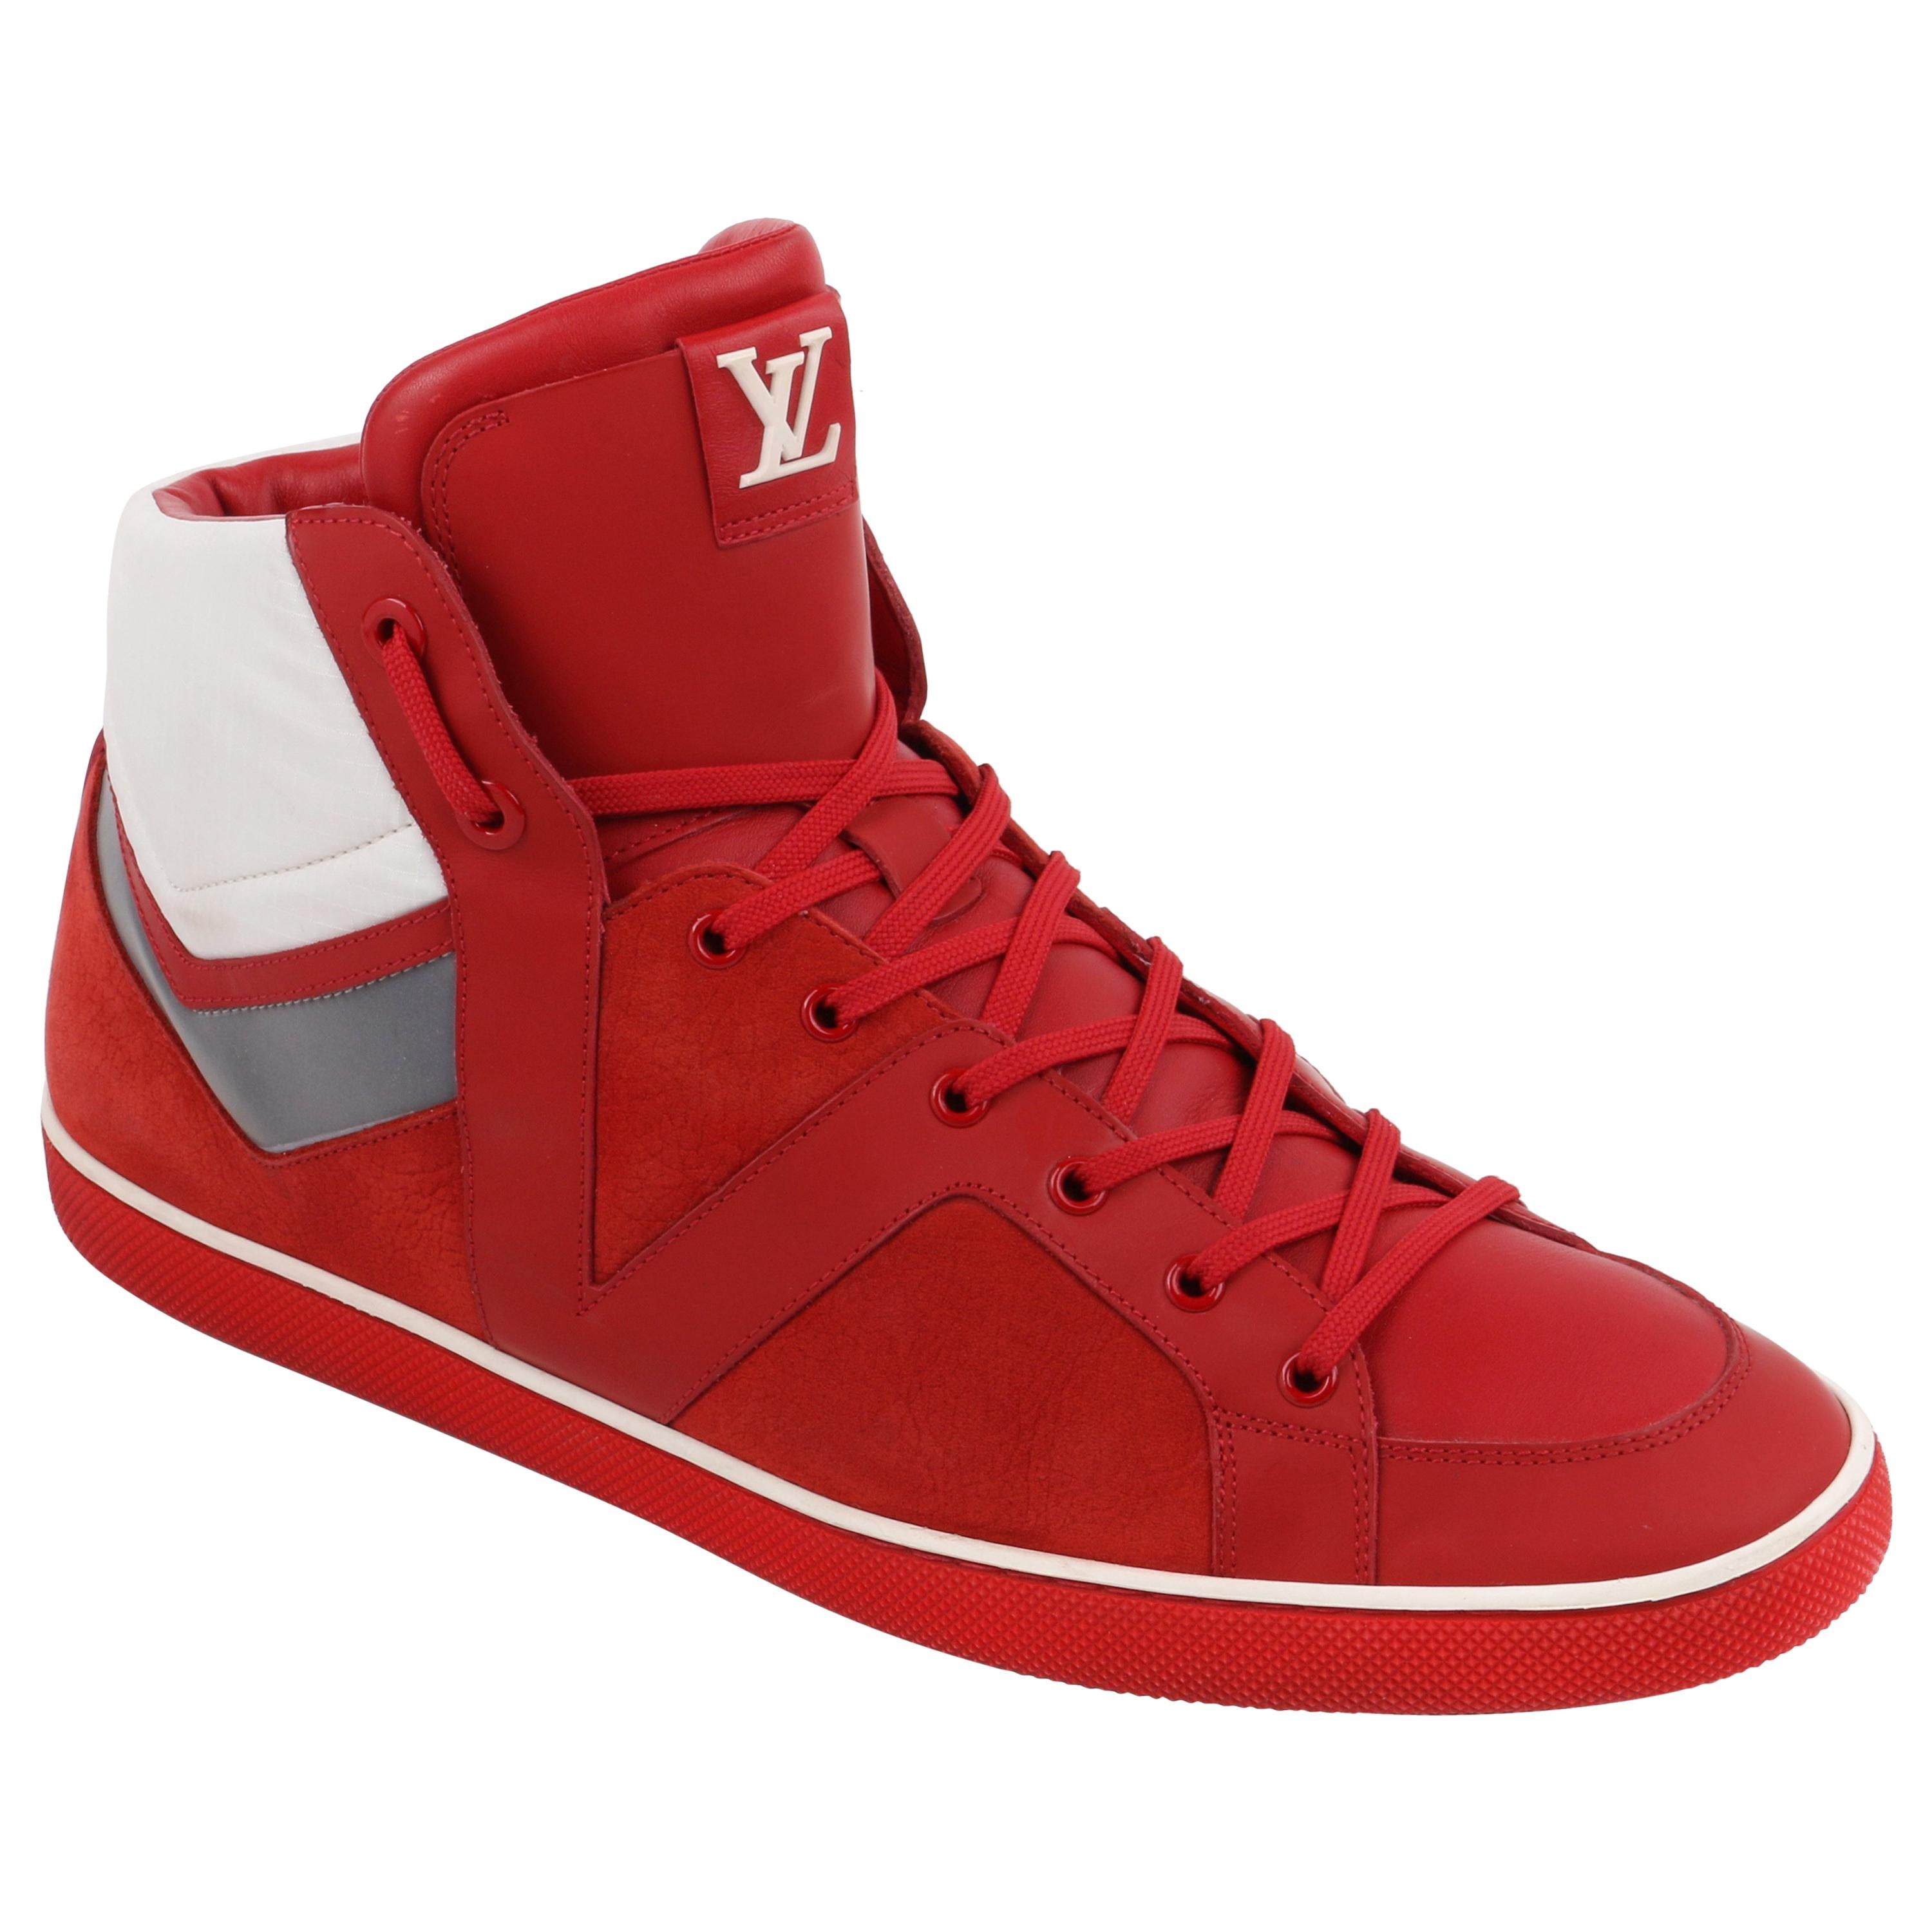 LOUIS VUITTON A/W 2012 "Heroes" Red Suede & Leather High Top Sneaker Boot